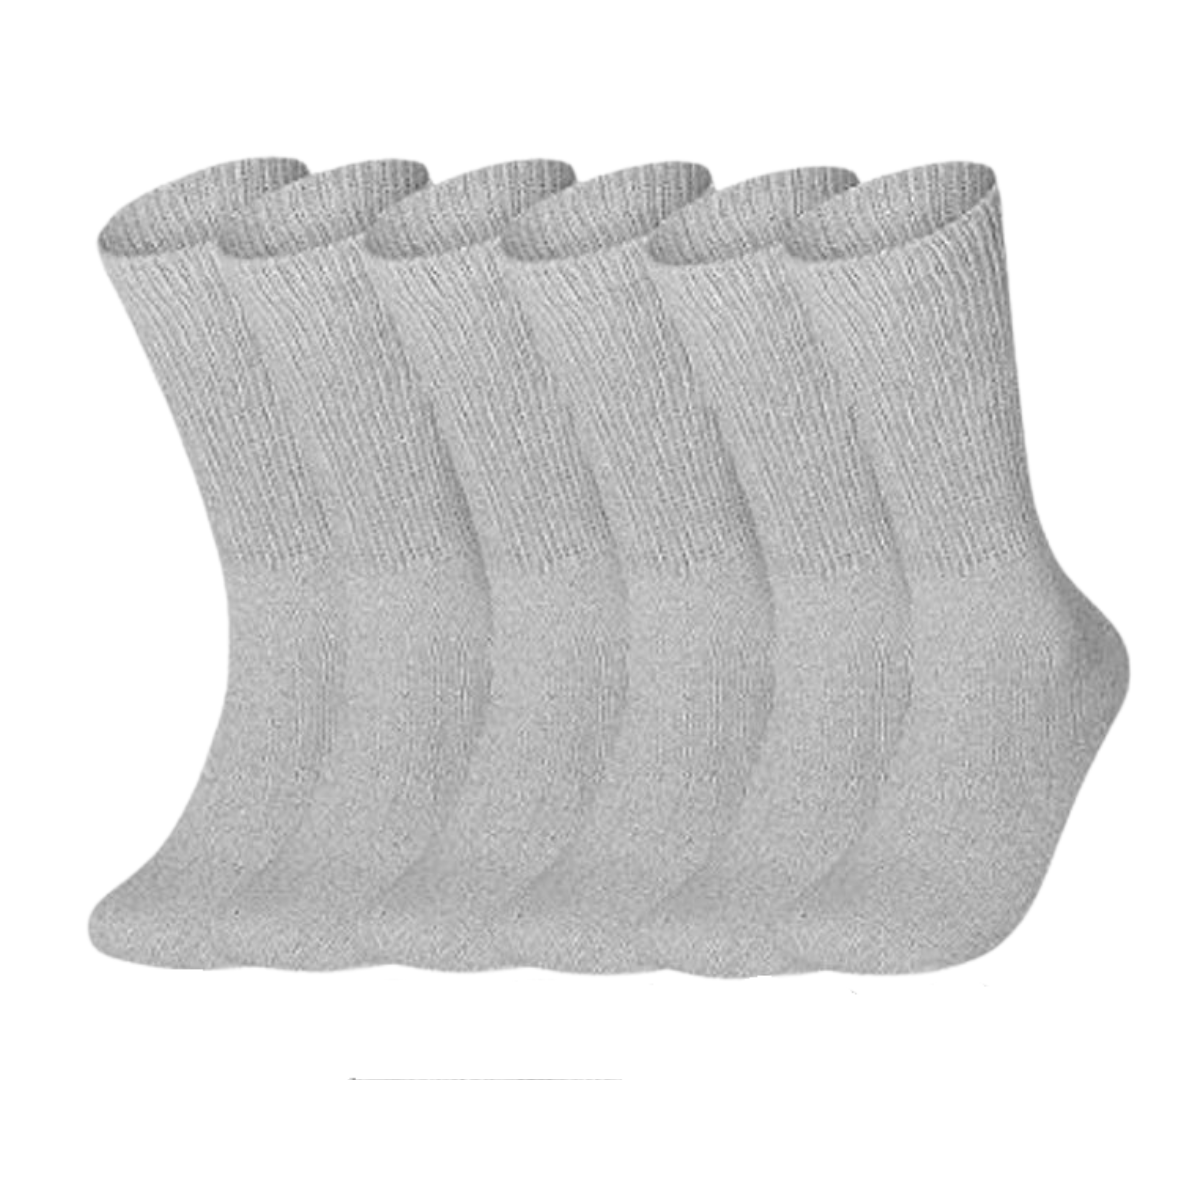 calcetines sin compresion – racotex